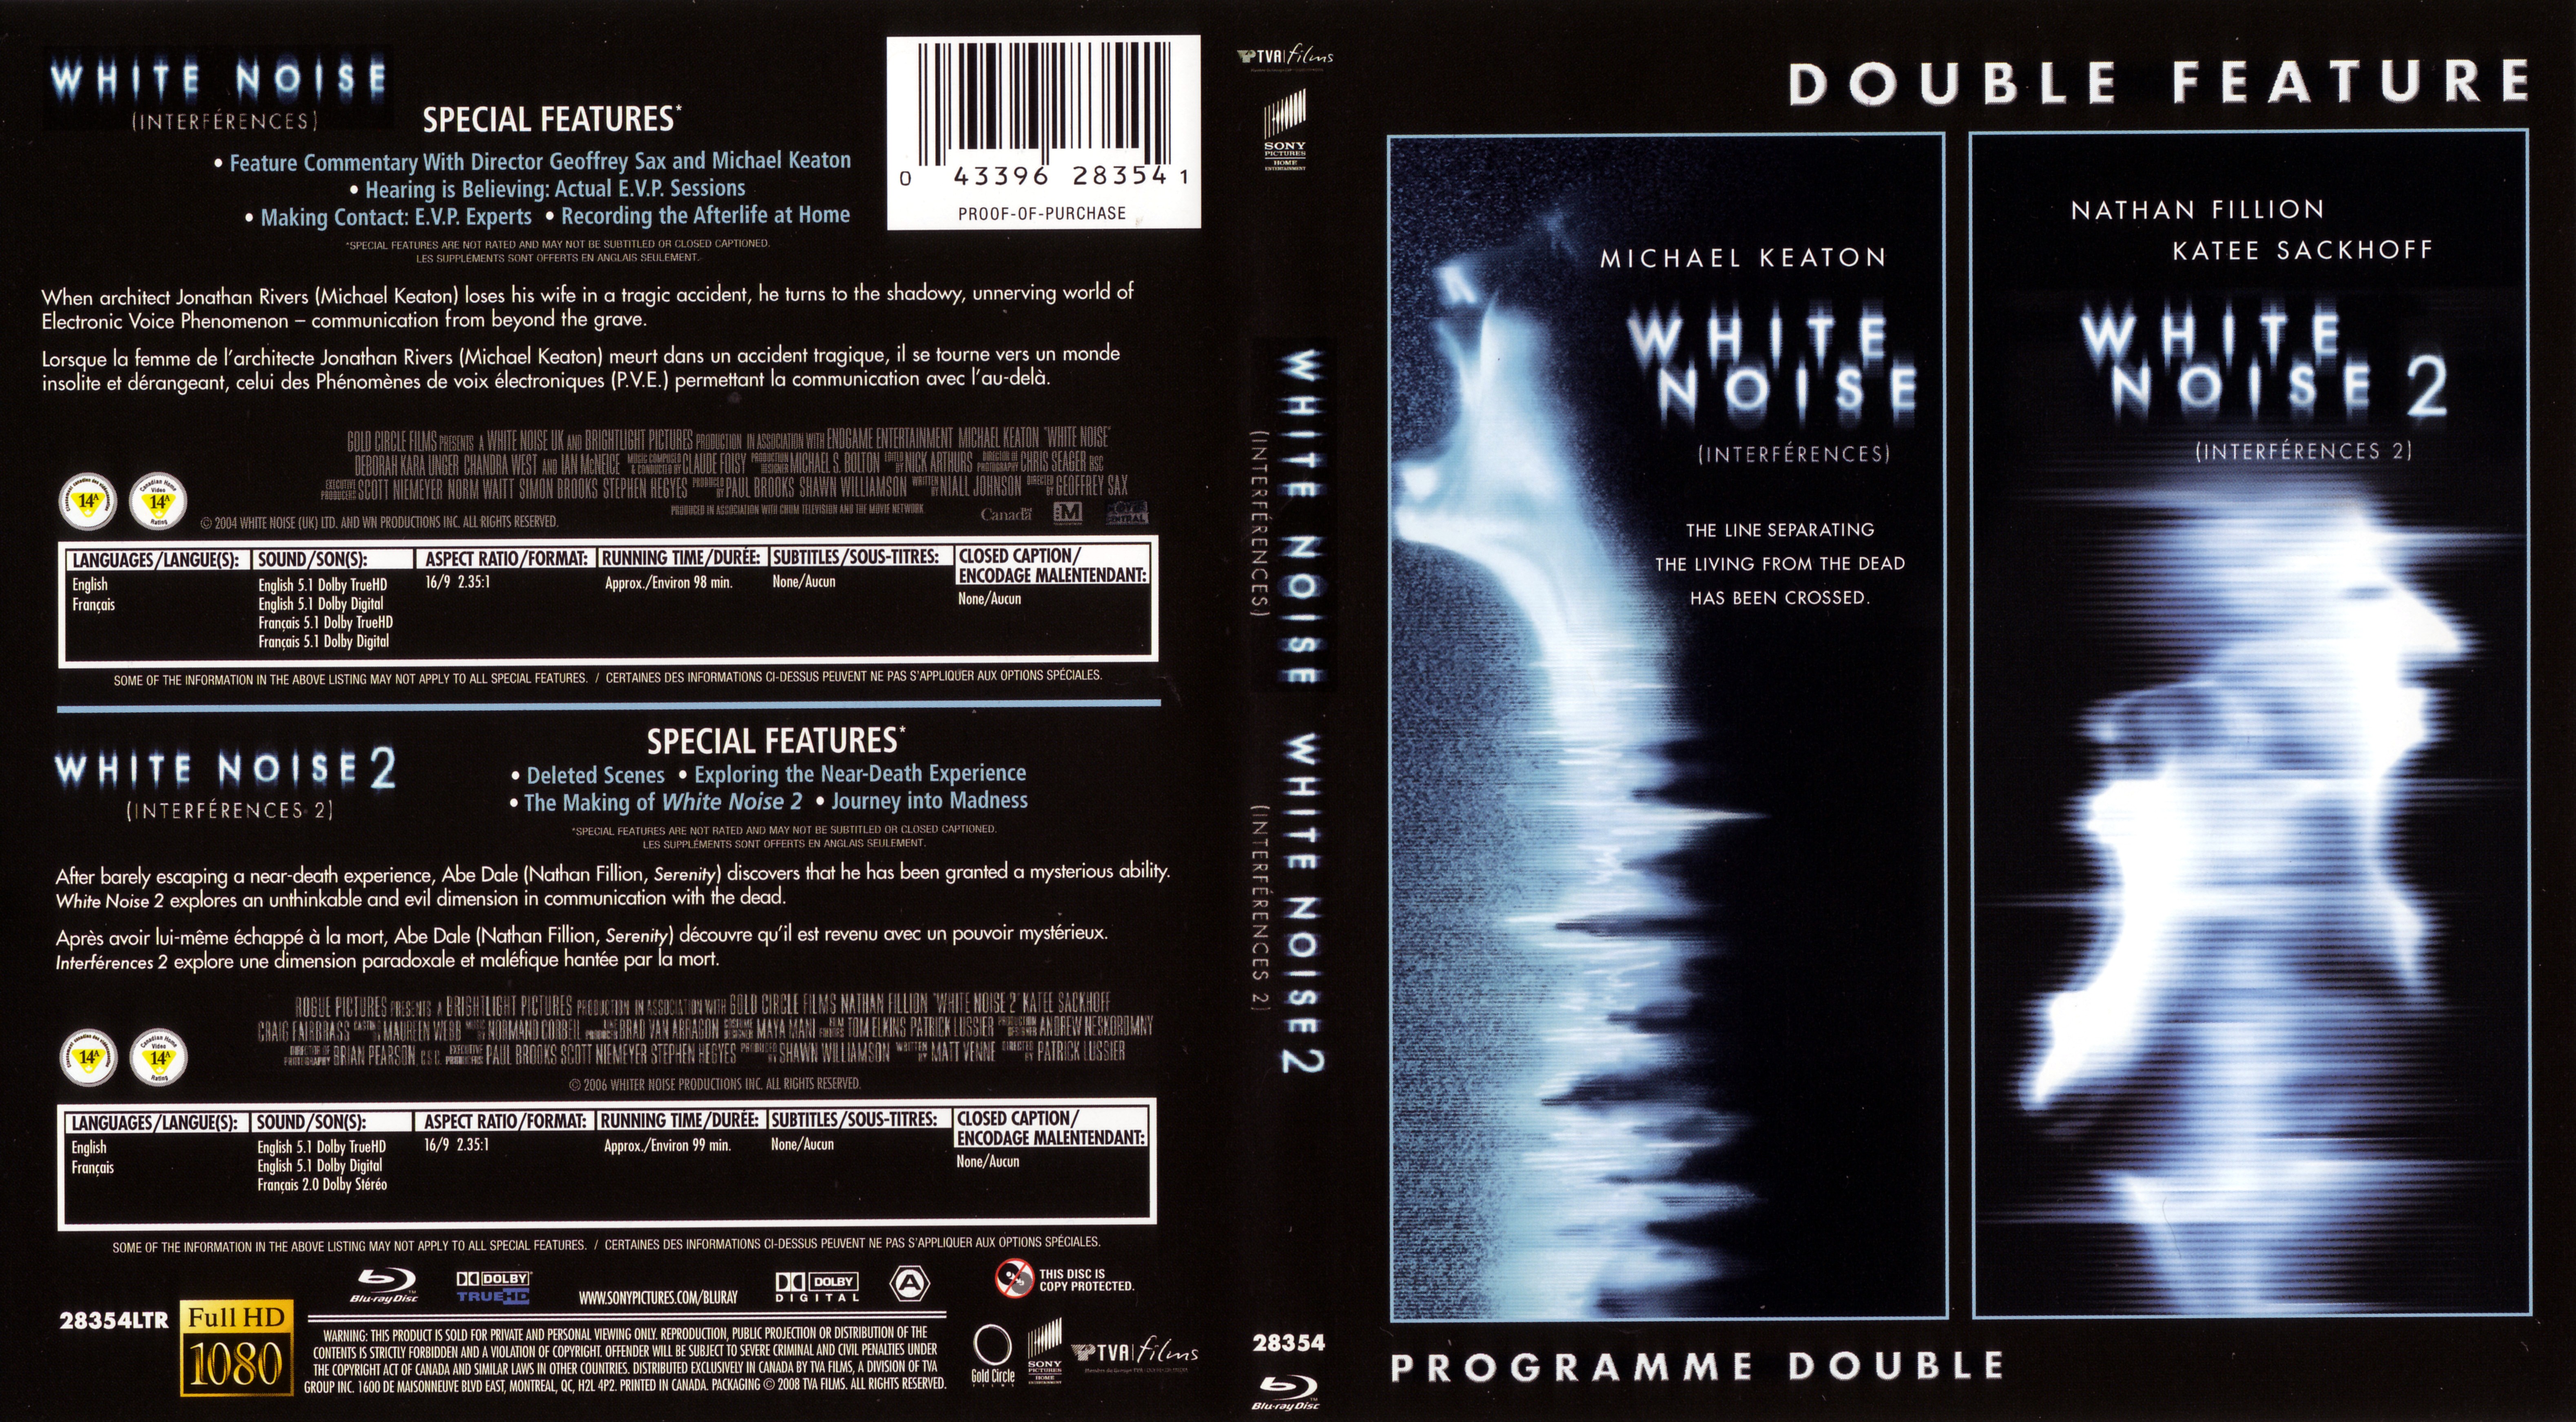 Jaquette DVD White noise 1 + 2 (Canadienne) (BLU-RAY)